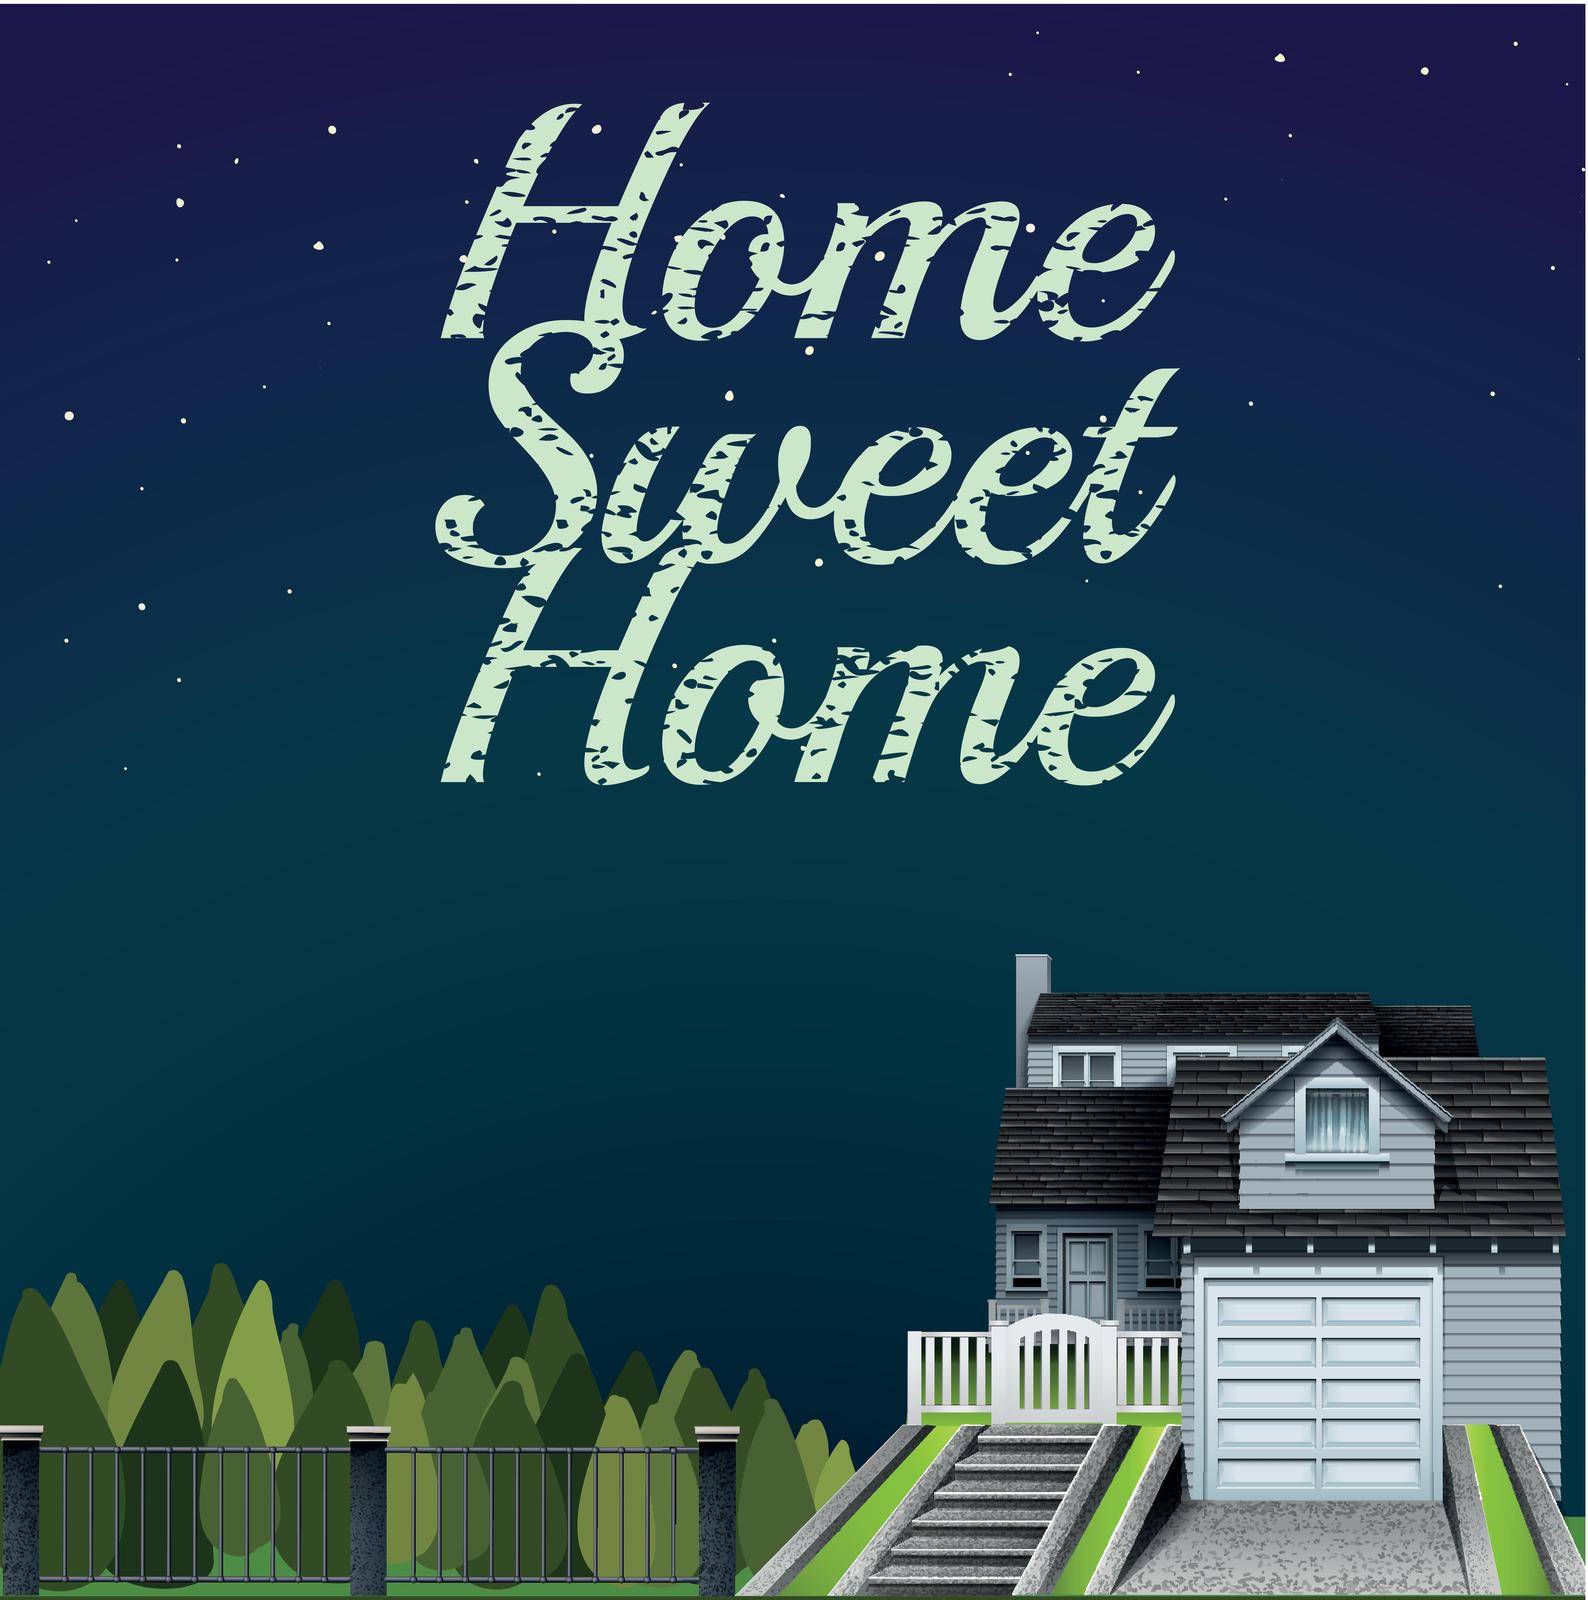 Home sweet home at night time illustration